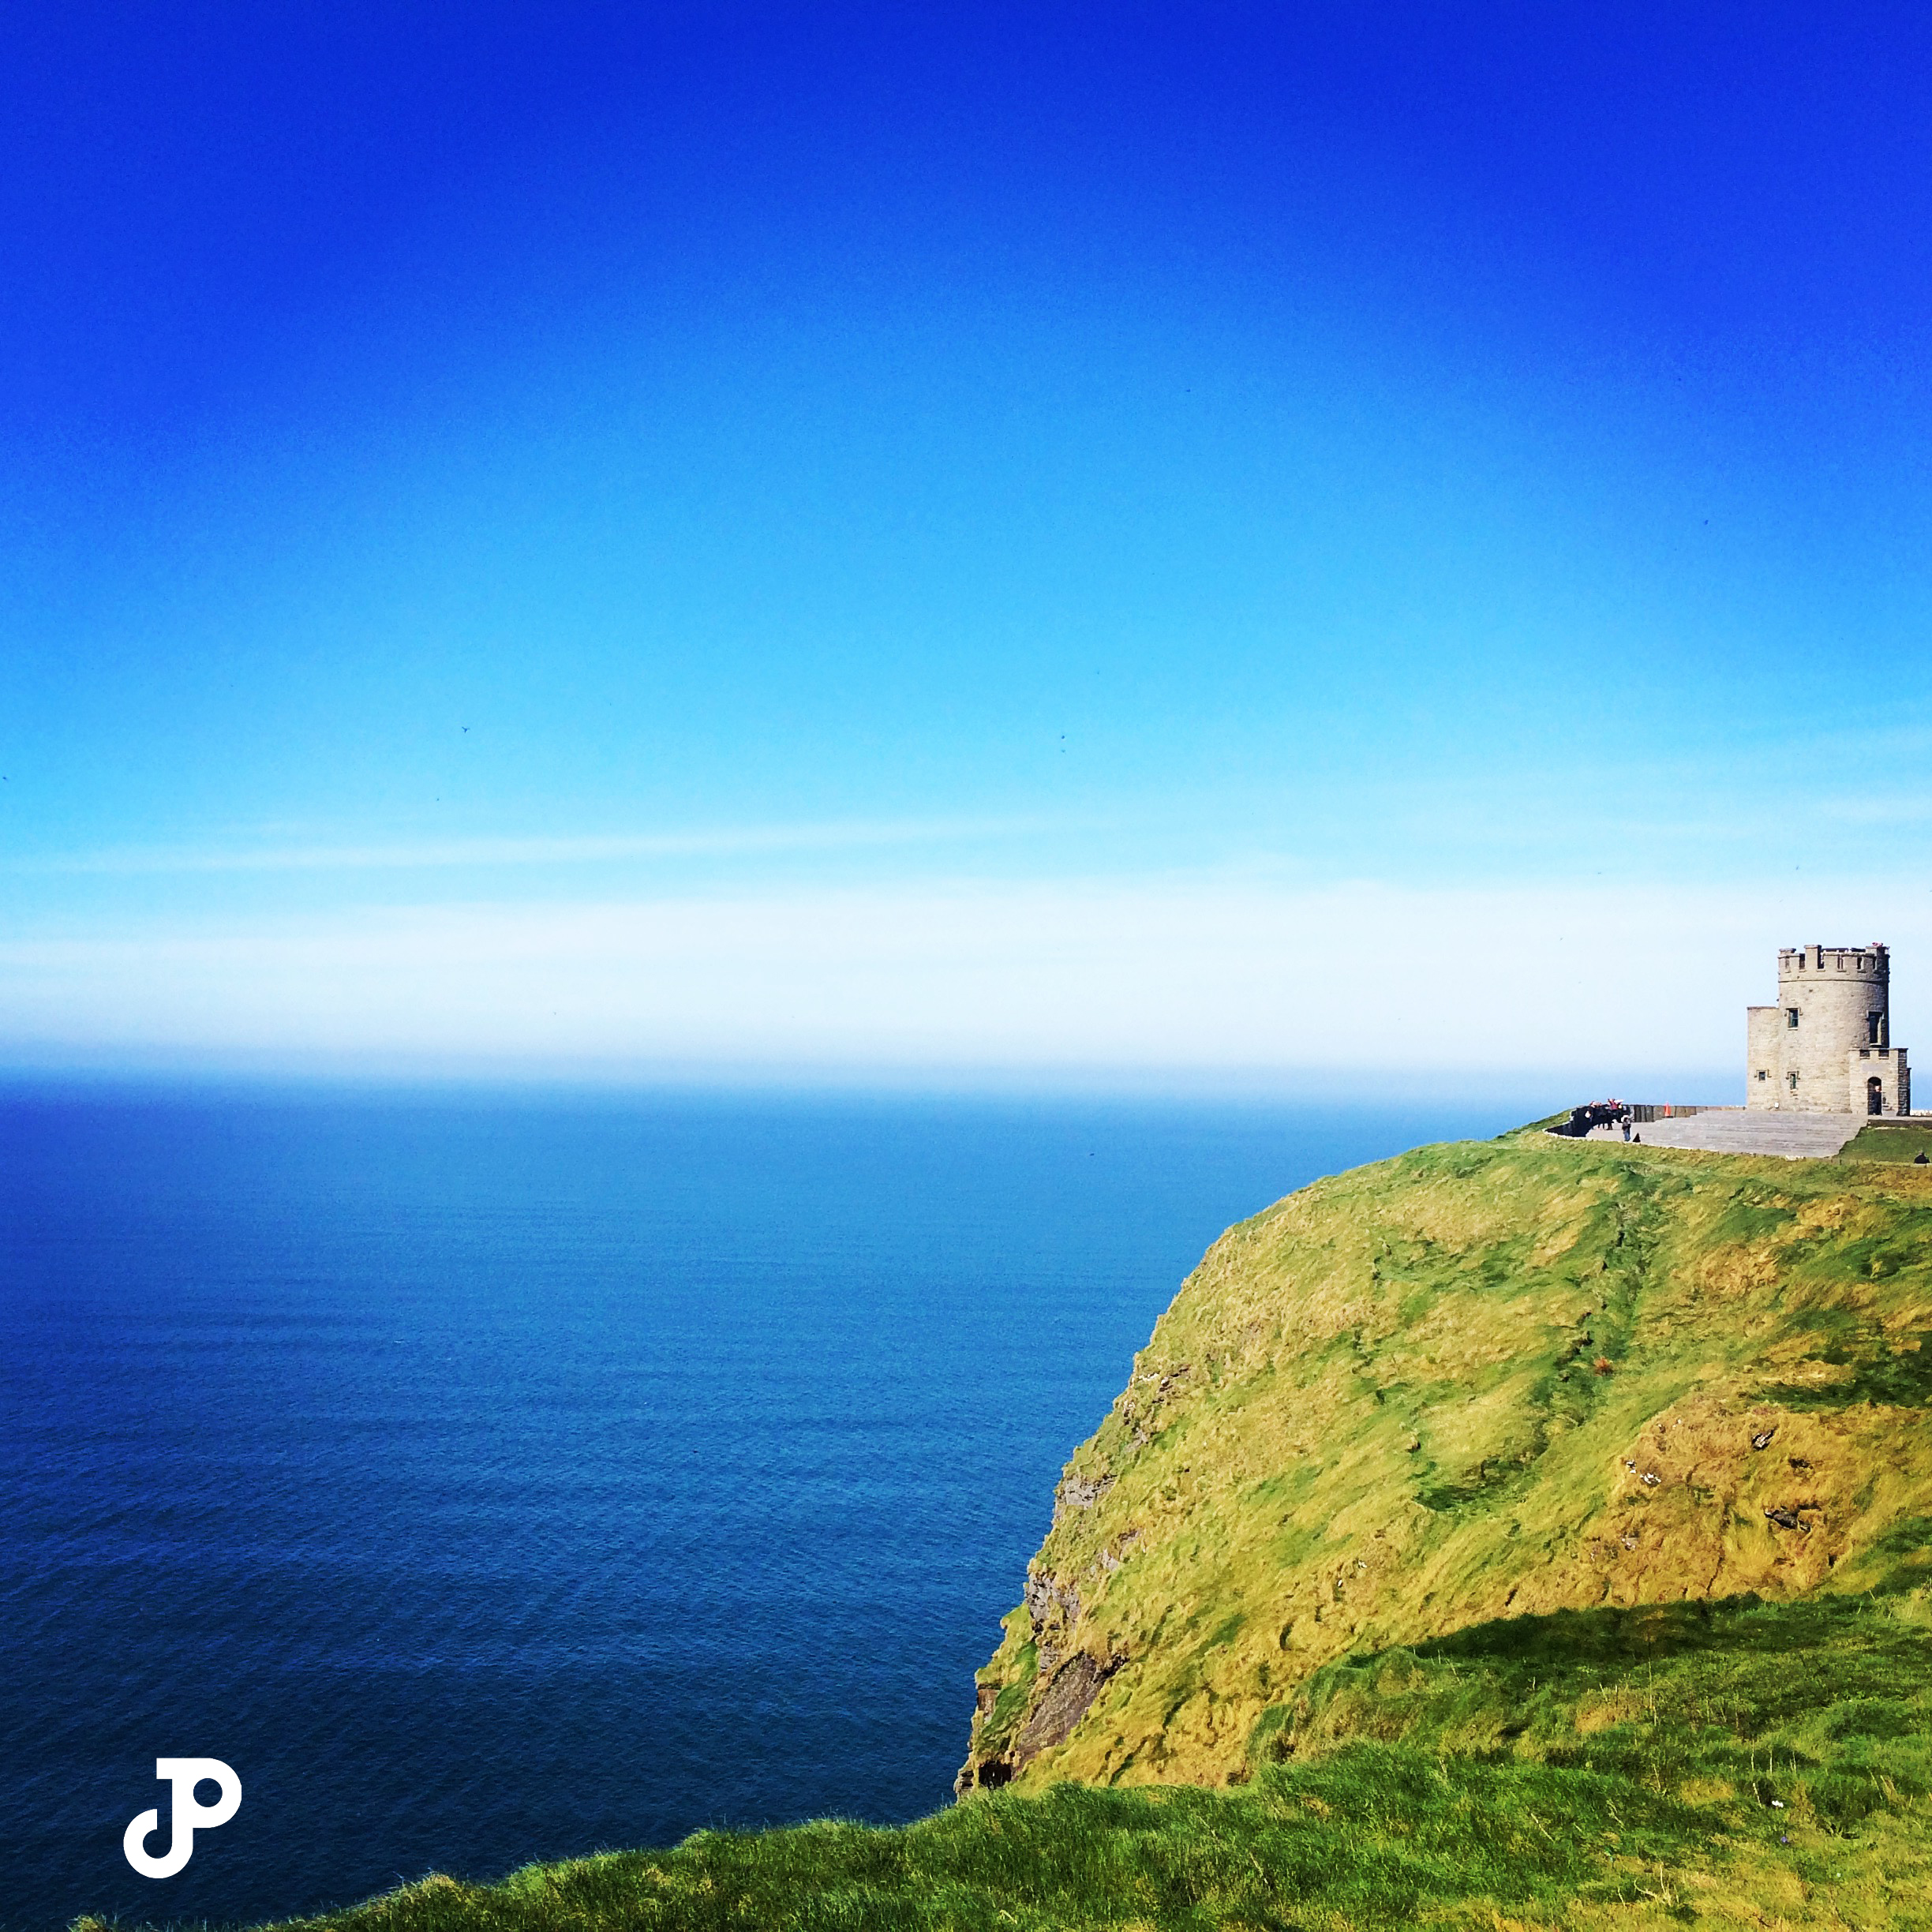 a small castle perched on a grassy cliff overlooking the sea on a bright, clear day